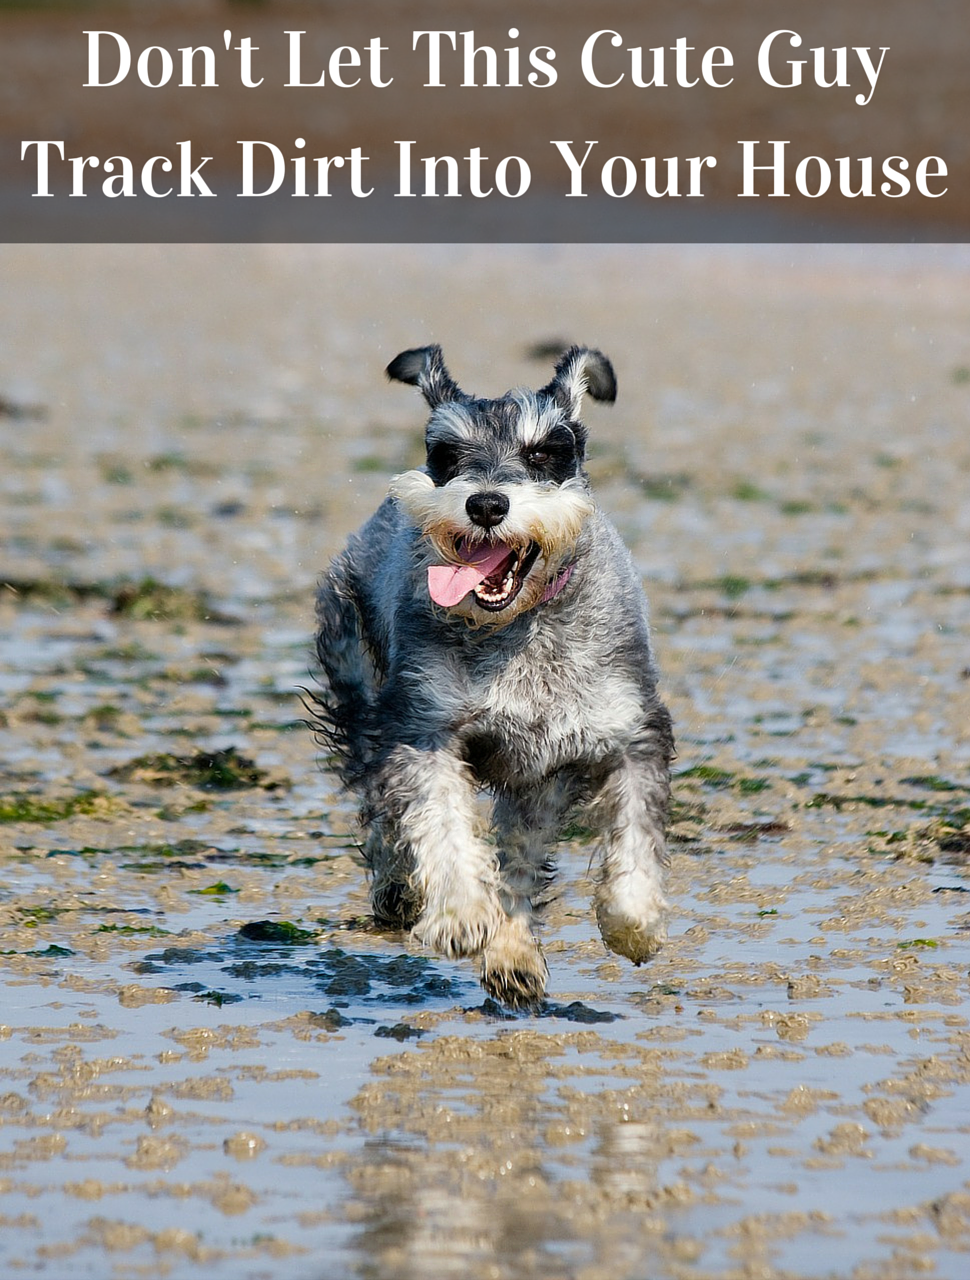 Turf vs. Grass: Who Wins When It Comes To Tracking Dirt In The House http://blog.heavenlygreens.com/blog/bid/203777/Turf-vs-Grass-Who-Wins-When-It-Comes-To-Tracking-Dirt-In-The-House @heavenlygreens